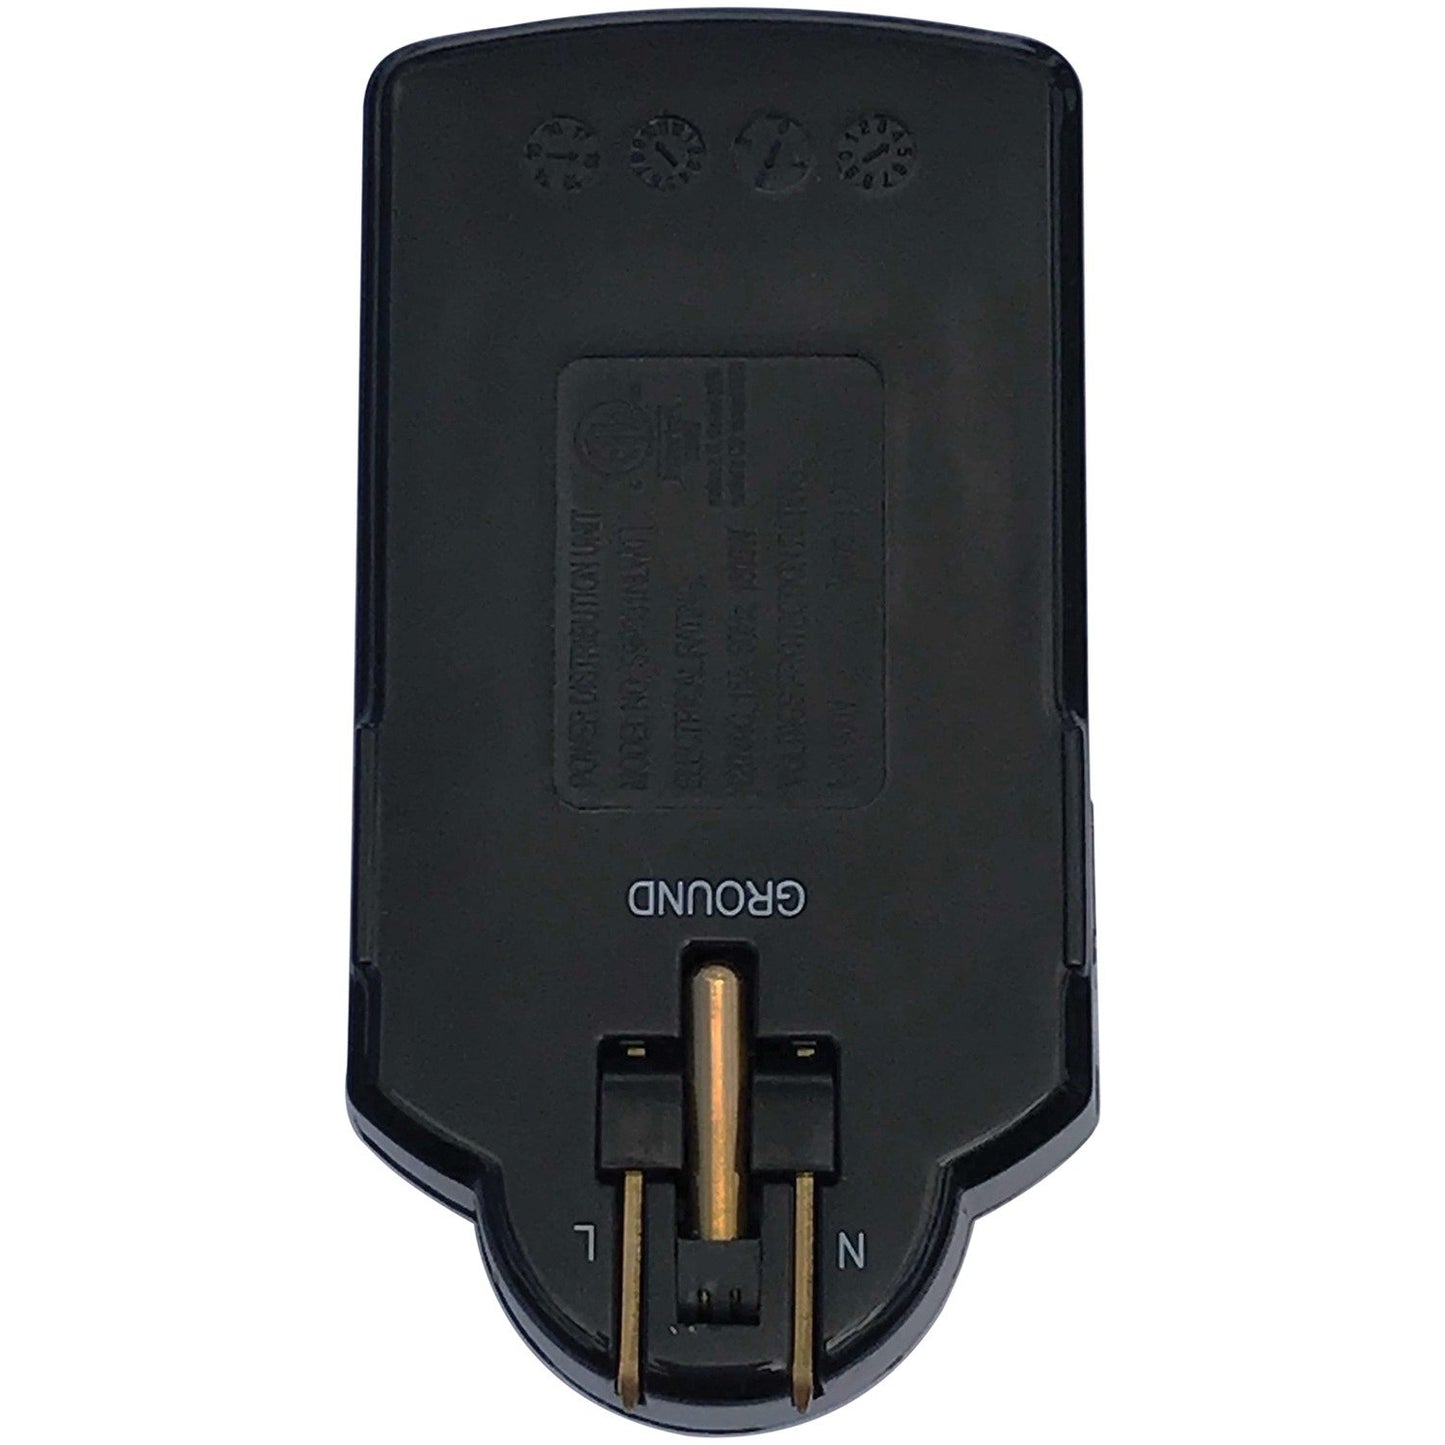 Accell D080B-011K Home or Away Power Station 3-Outlet Travel Surge Protector